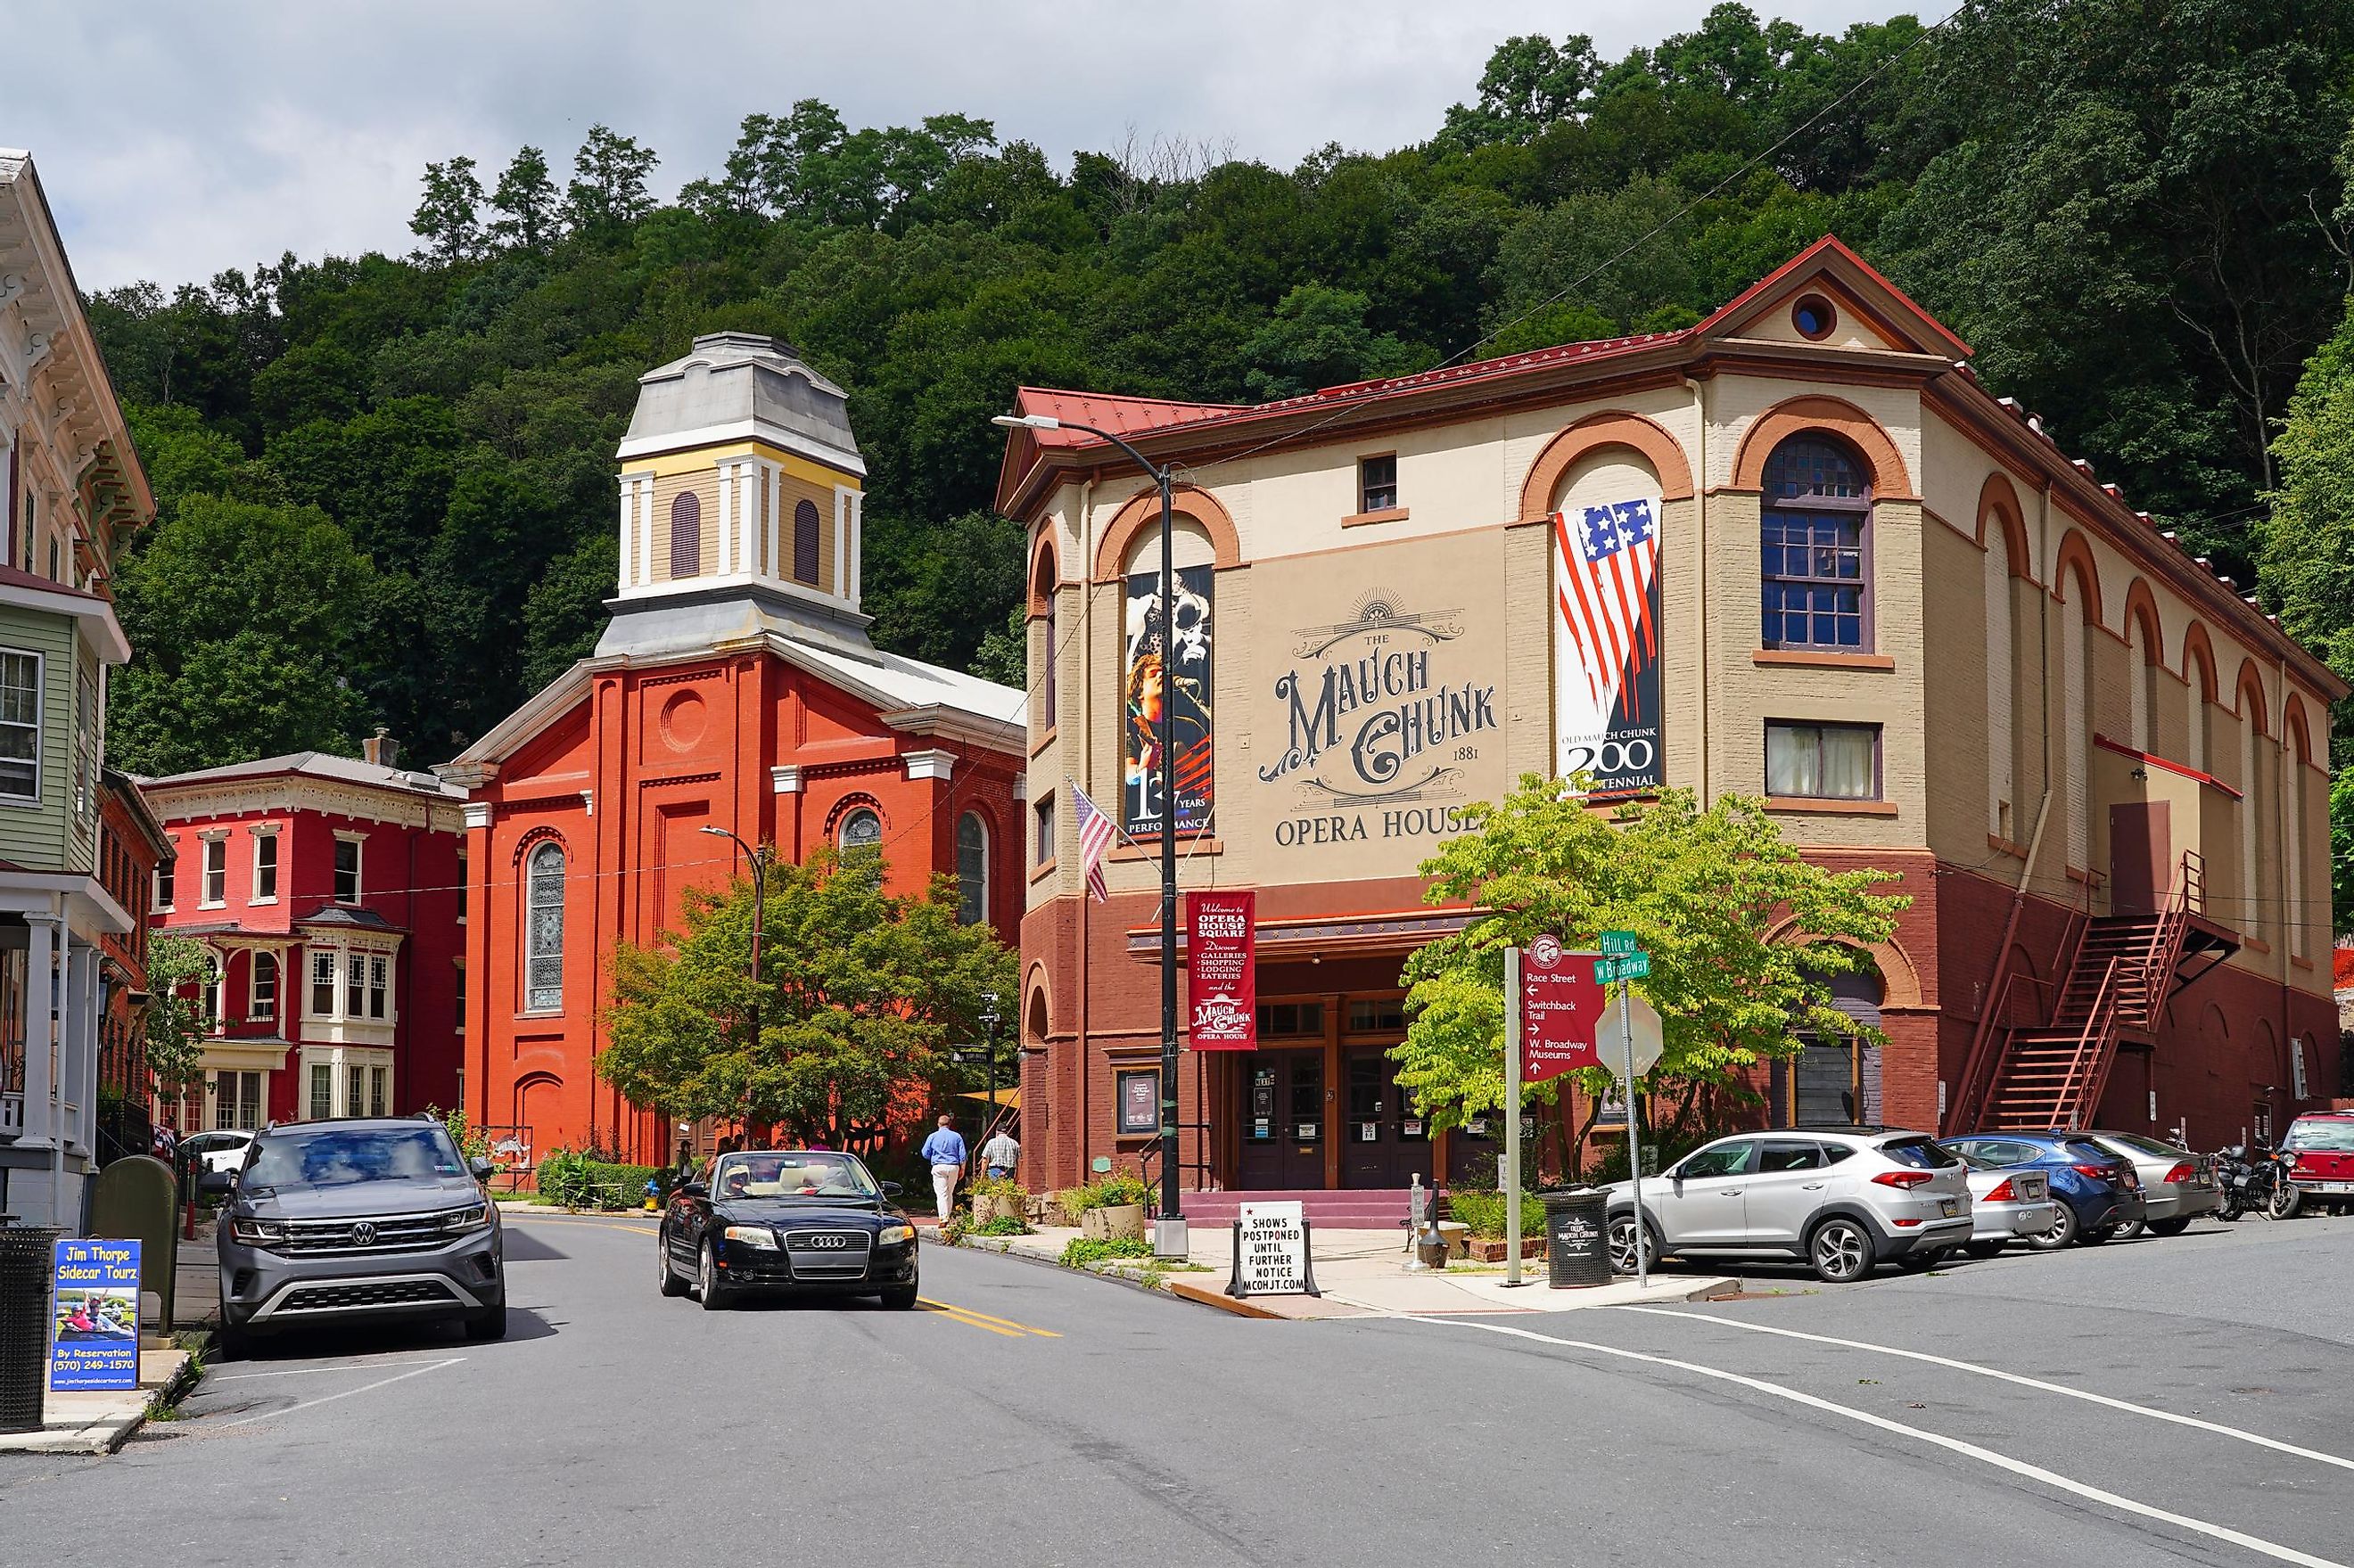  View of the landmark Mauch Chunk Opera House in the historic town of Jim Thorpe in the Lehigh Valley in Carbon County, Pennsylvania, United States.